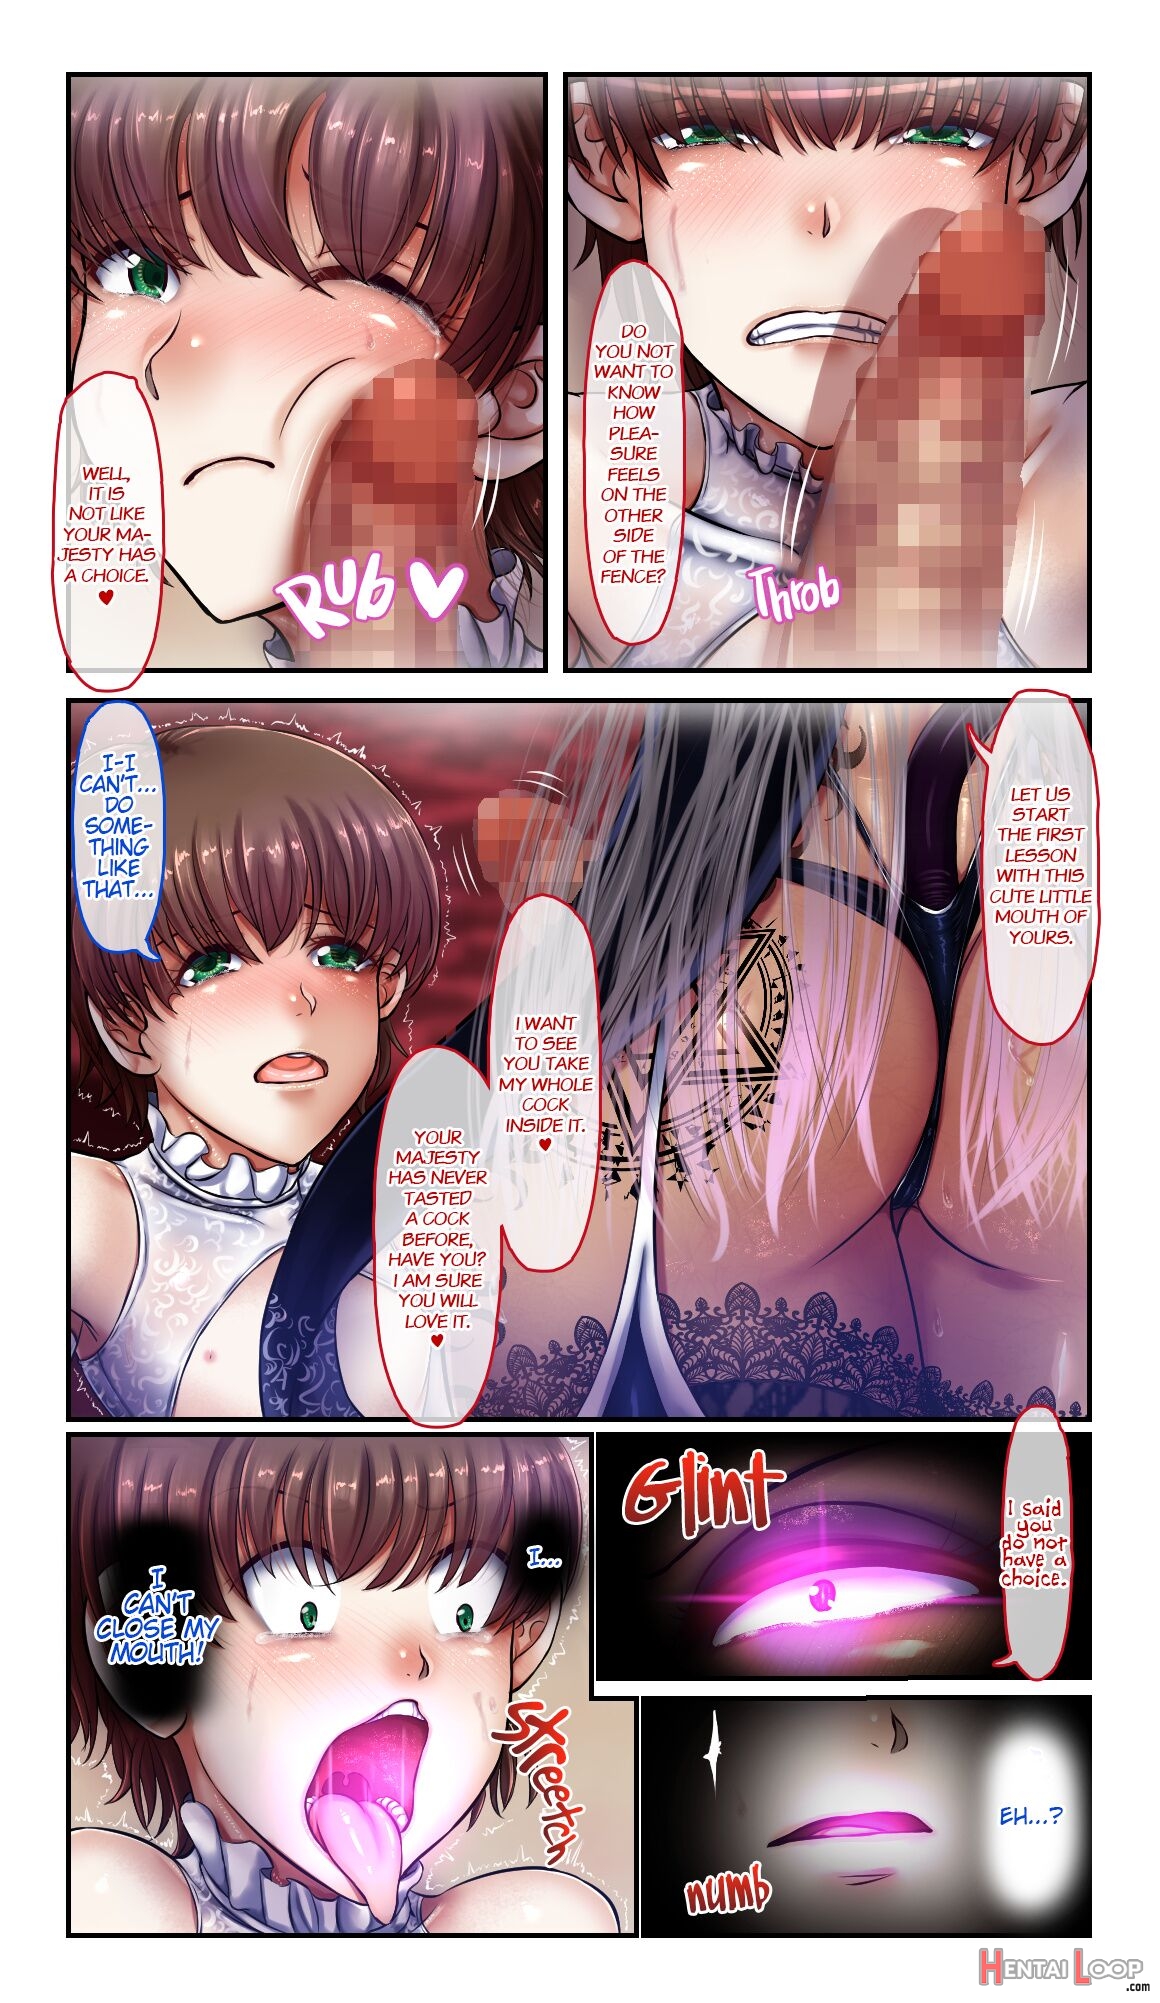 Sweetedda Vol.6: Succubus Reincarnation - Ischia, The General Of Corruption page 10